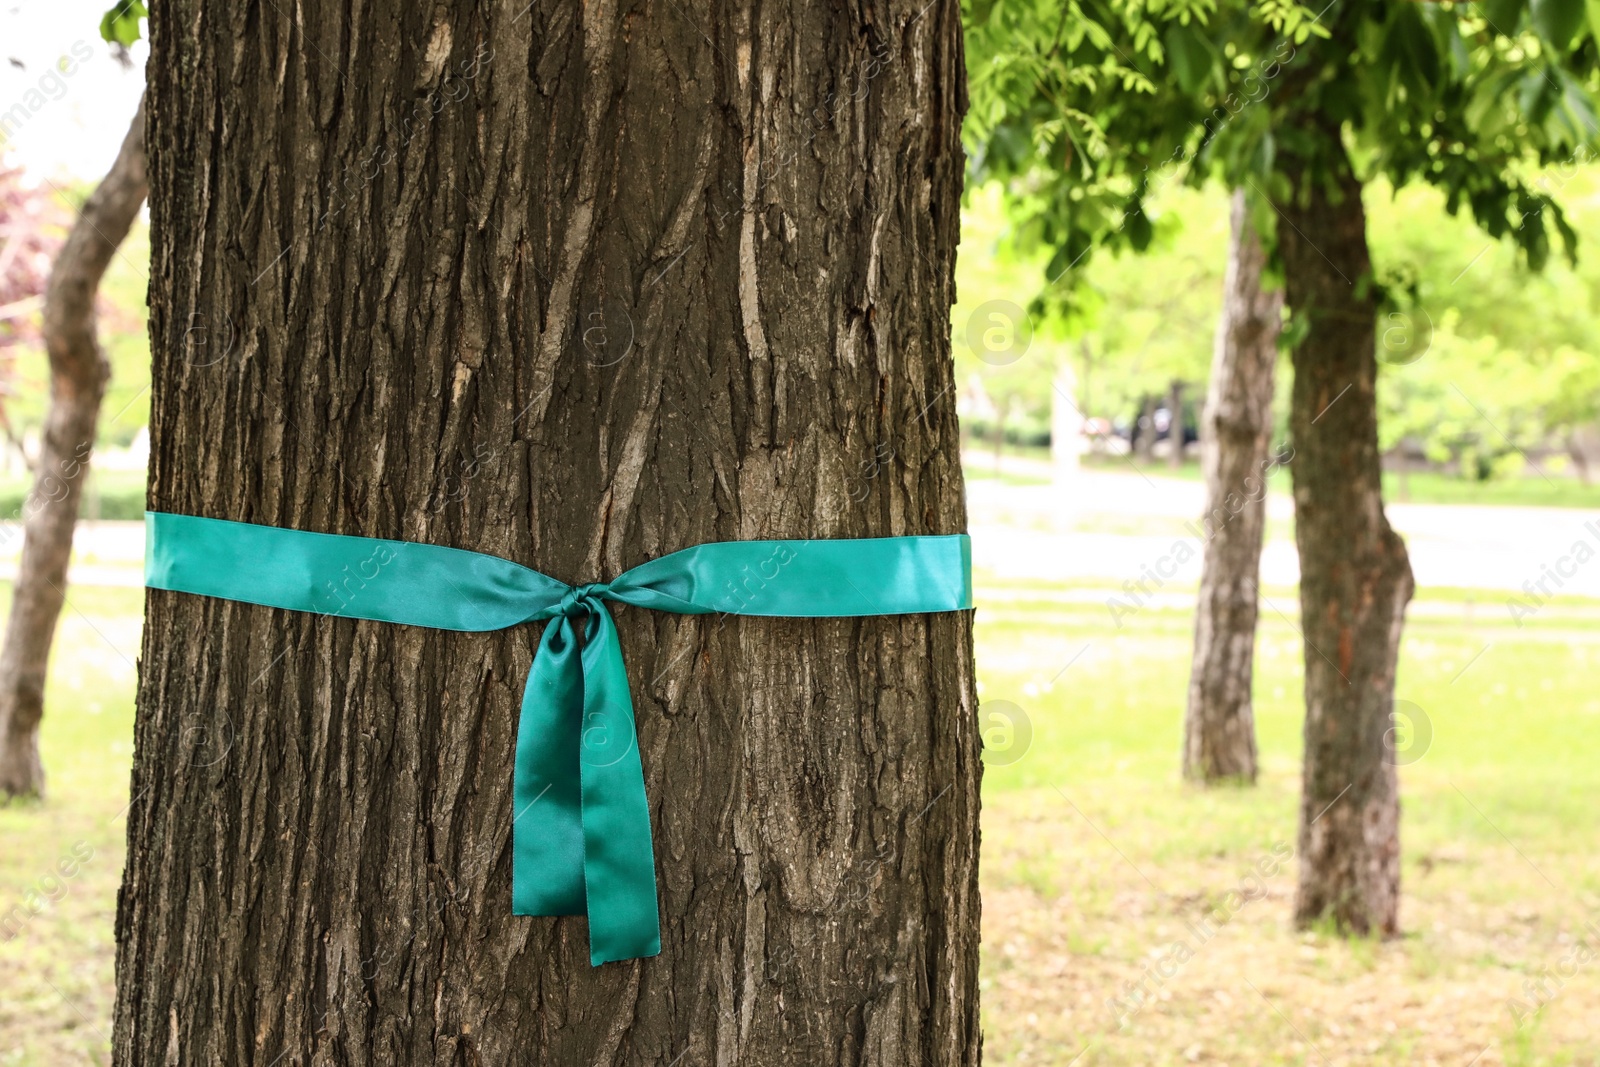 Photo of Teal awareness ribbon tied on tree in park, space for text